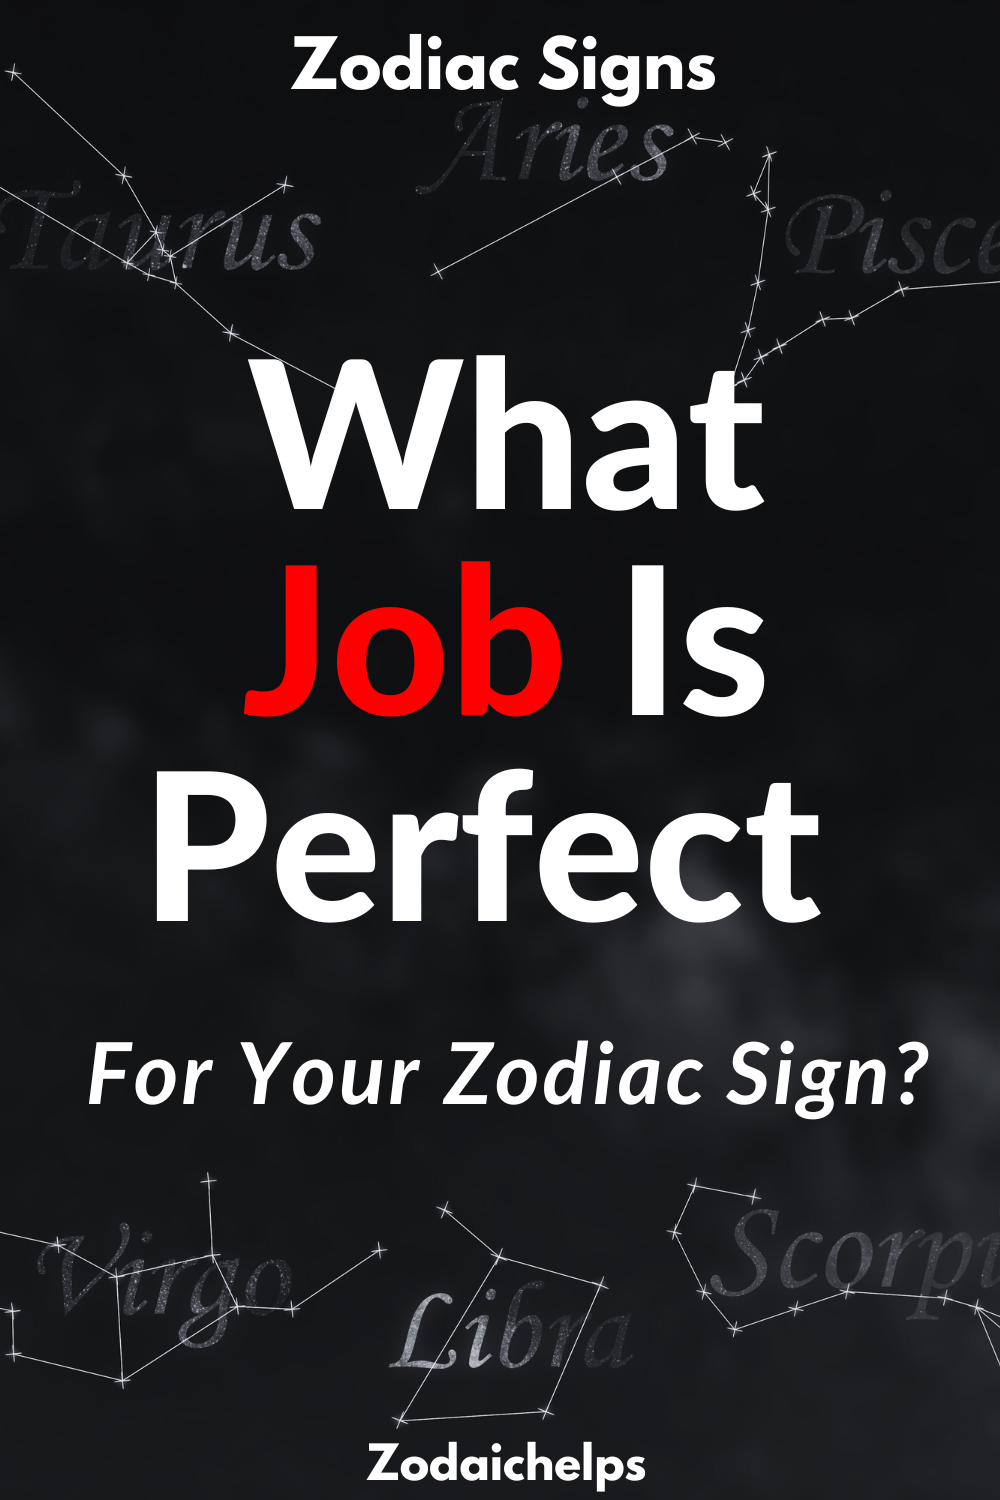 What Job Is Perfect For Your Zodiac Sign?